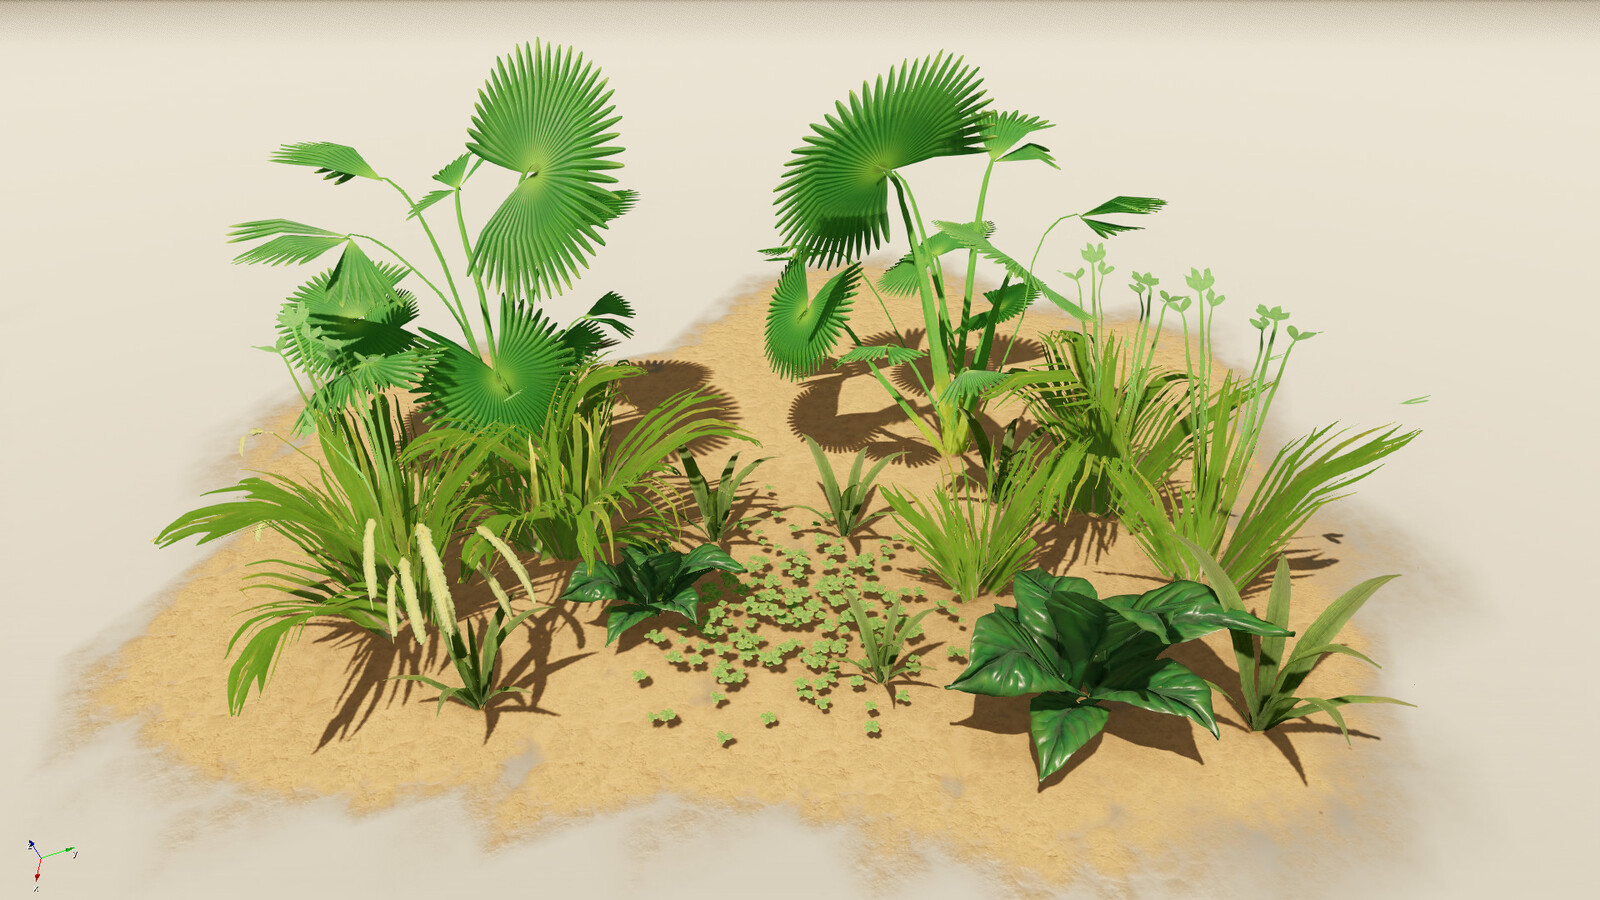 all of the foliages are rendered from highpolys except the fan palm. for it I used Substance designer